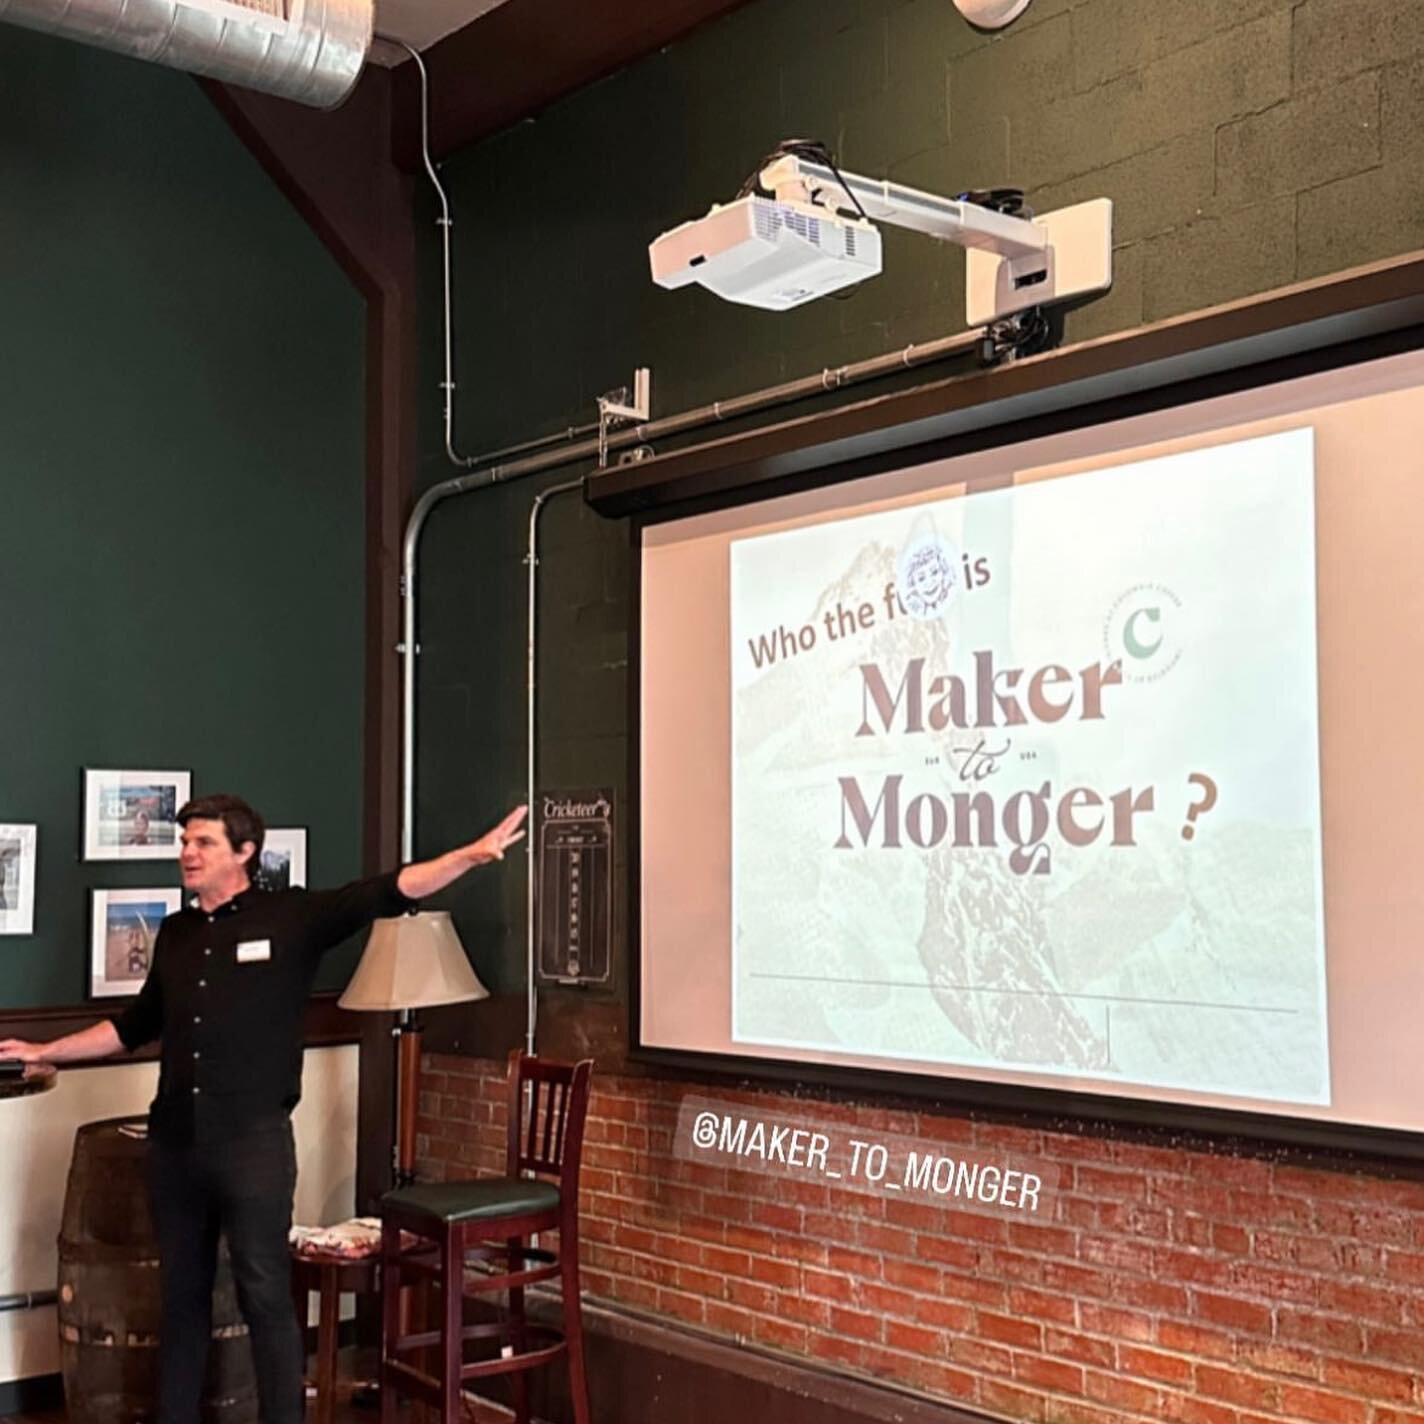 We had a blast presenting at #counterculturelive yesterday down in Houston!  Thanks to all the shops and mongers who came out to talk curdy with us.  We&rsquo;ll be attending a few other @counterculturecheese events this year if you weren&rsquo;t abl